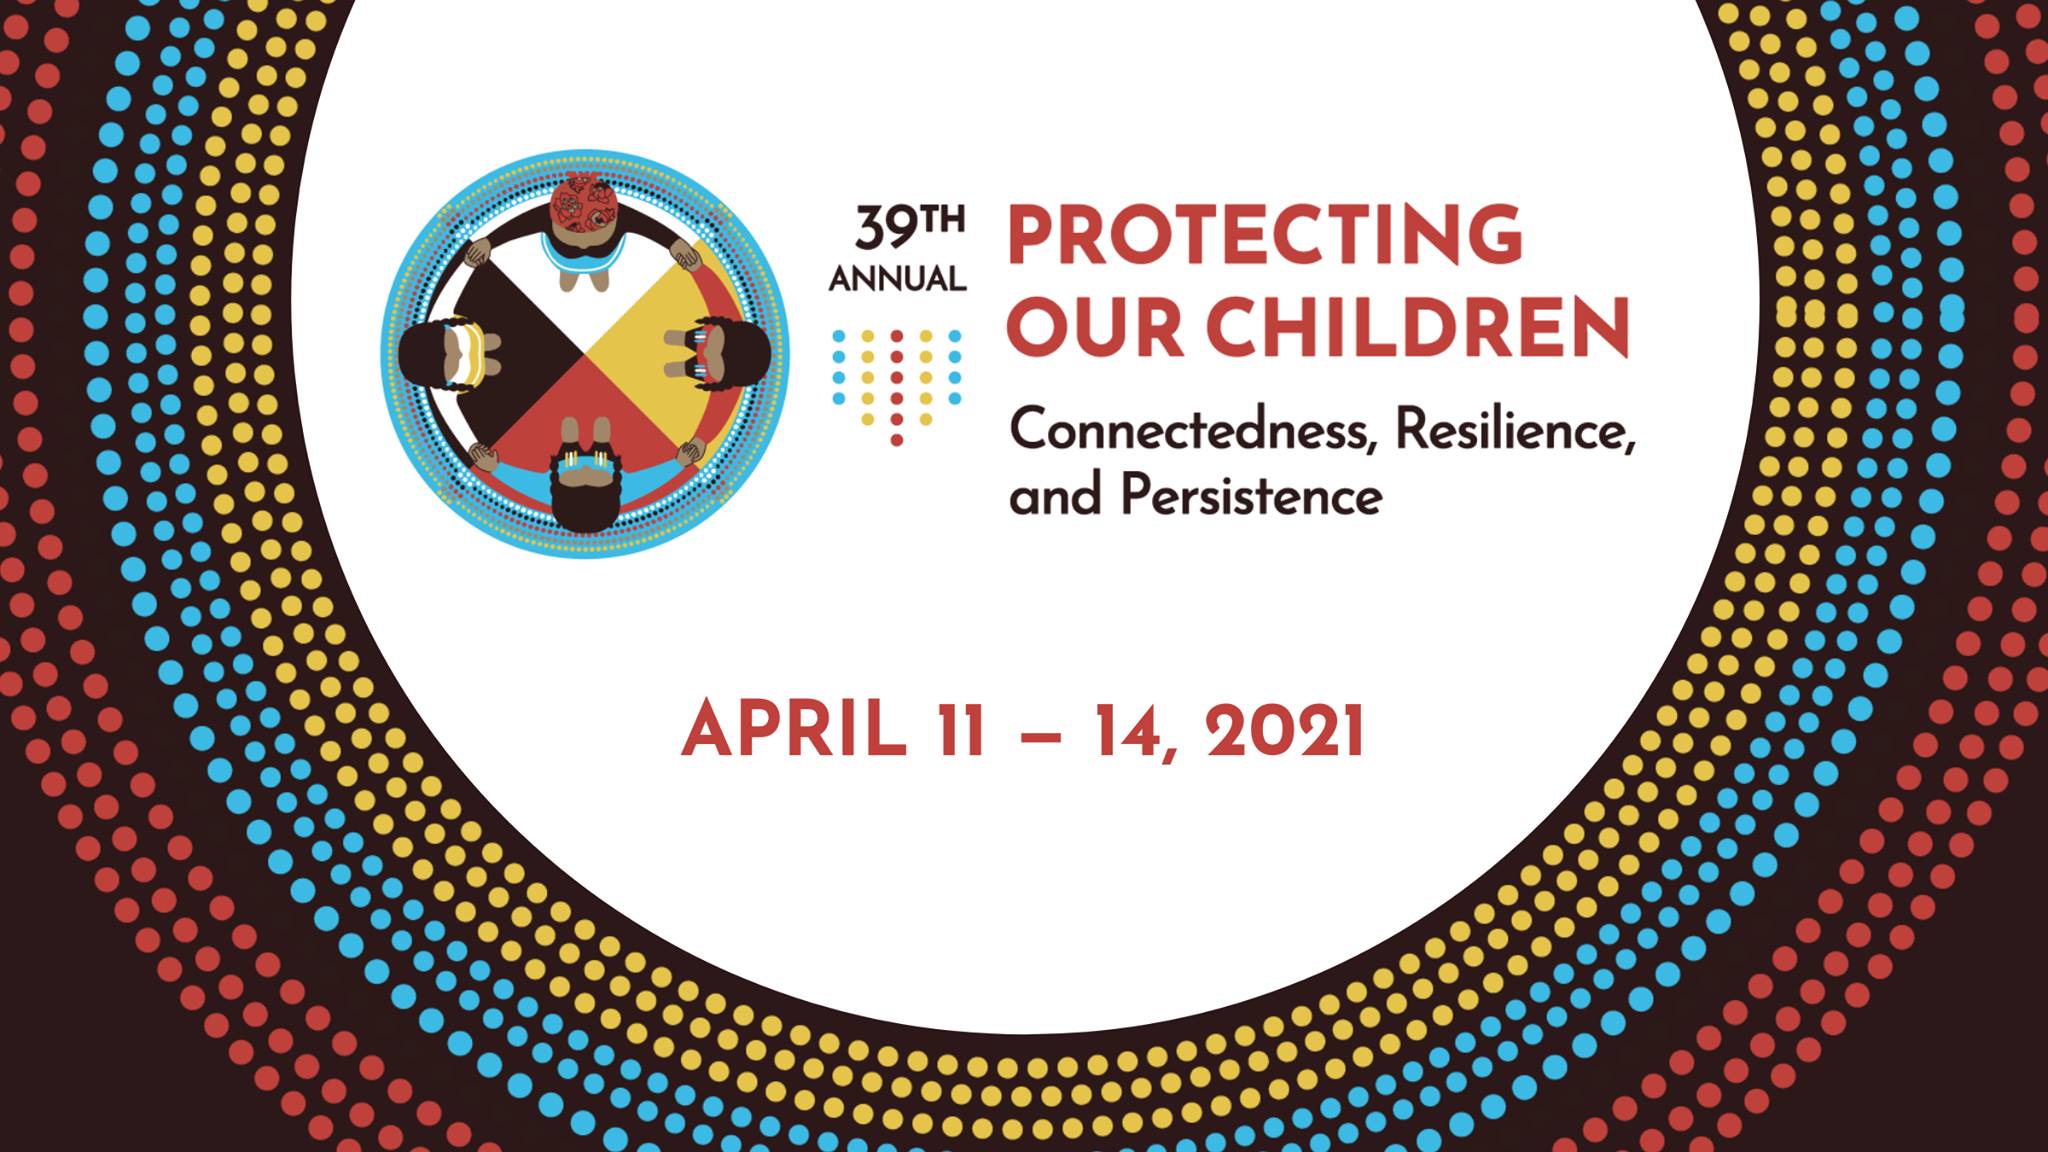 NICWA Protecting Our Children 39th Annual Event Logo